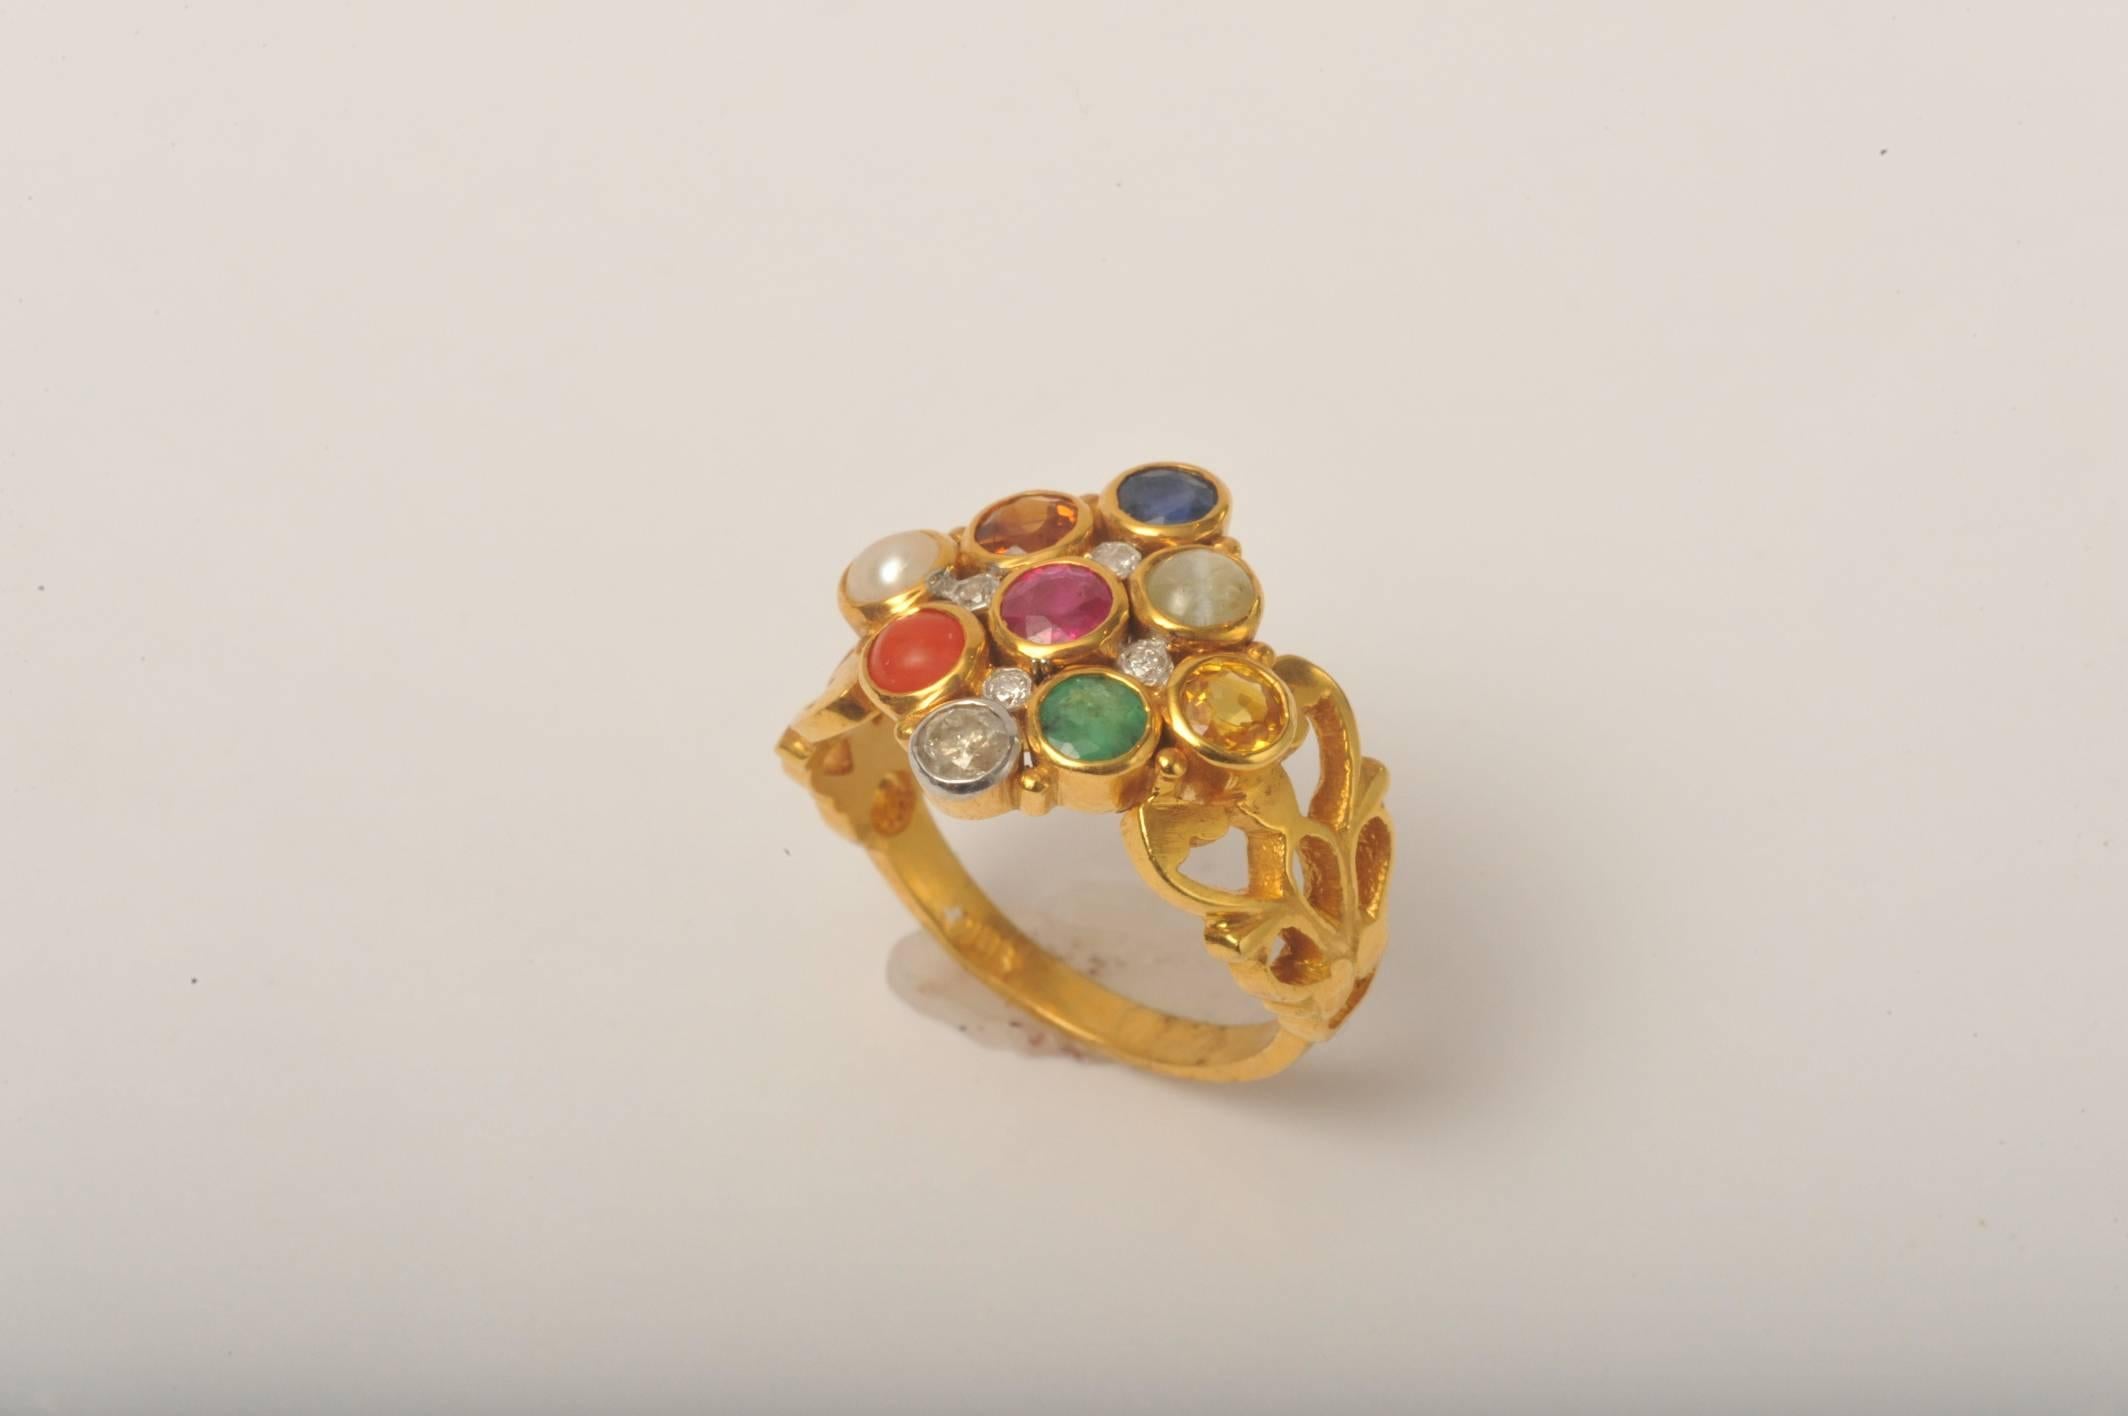 A beautiful combination of stones representing the NavaRatna mythology, bringing good fortune to the wearer.  22K gold with emerald, ruby, sapphire diamonds, pearl, coral, yellow sapphire, hessonite garnet and cats eye.  Each stone is representative